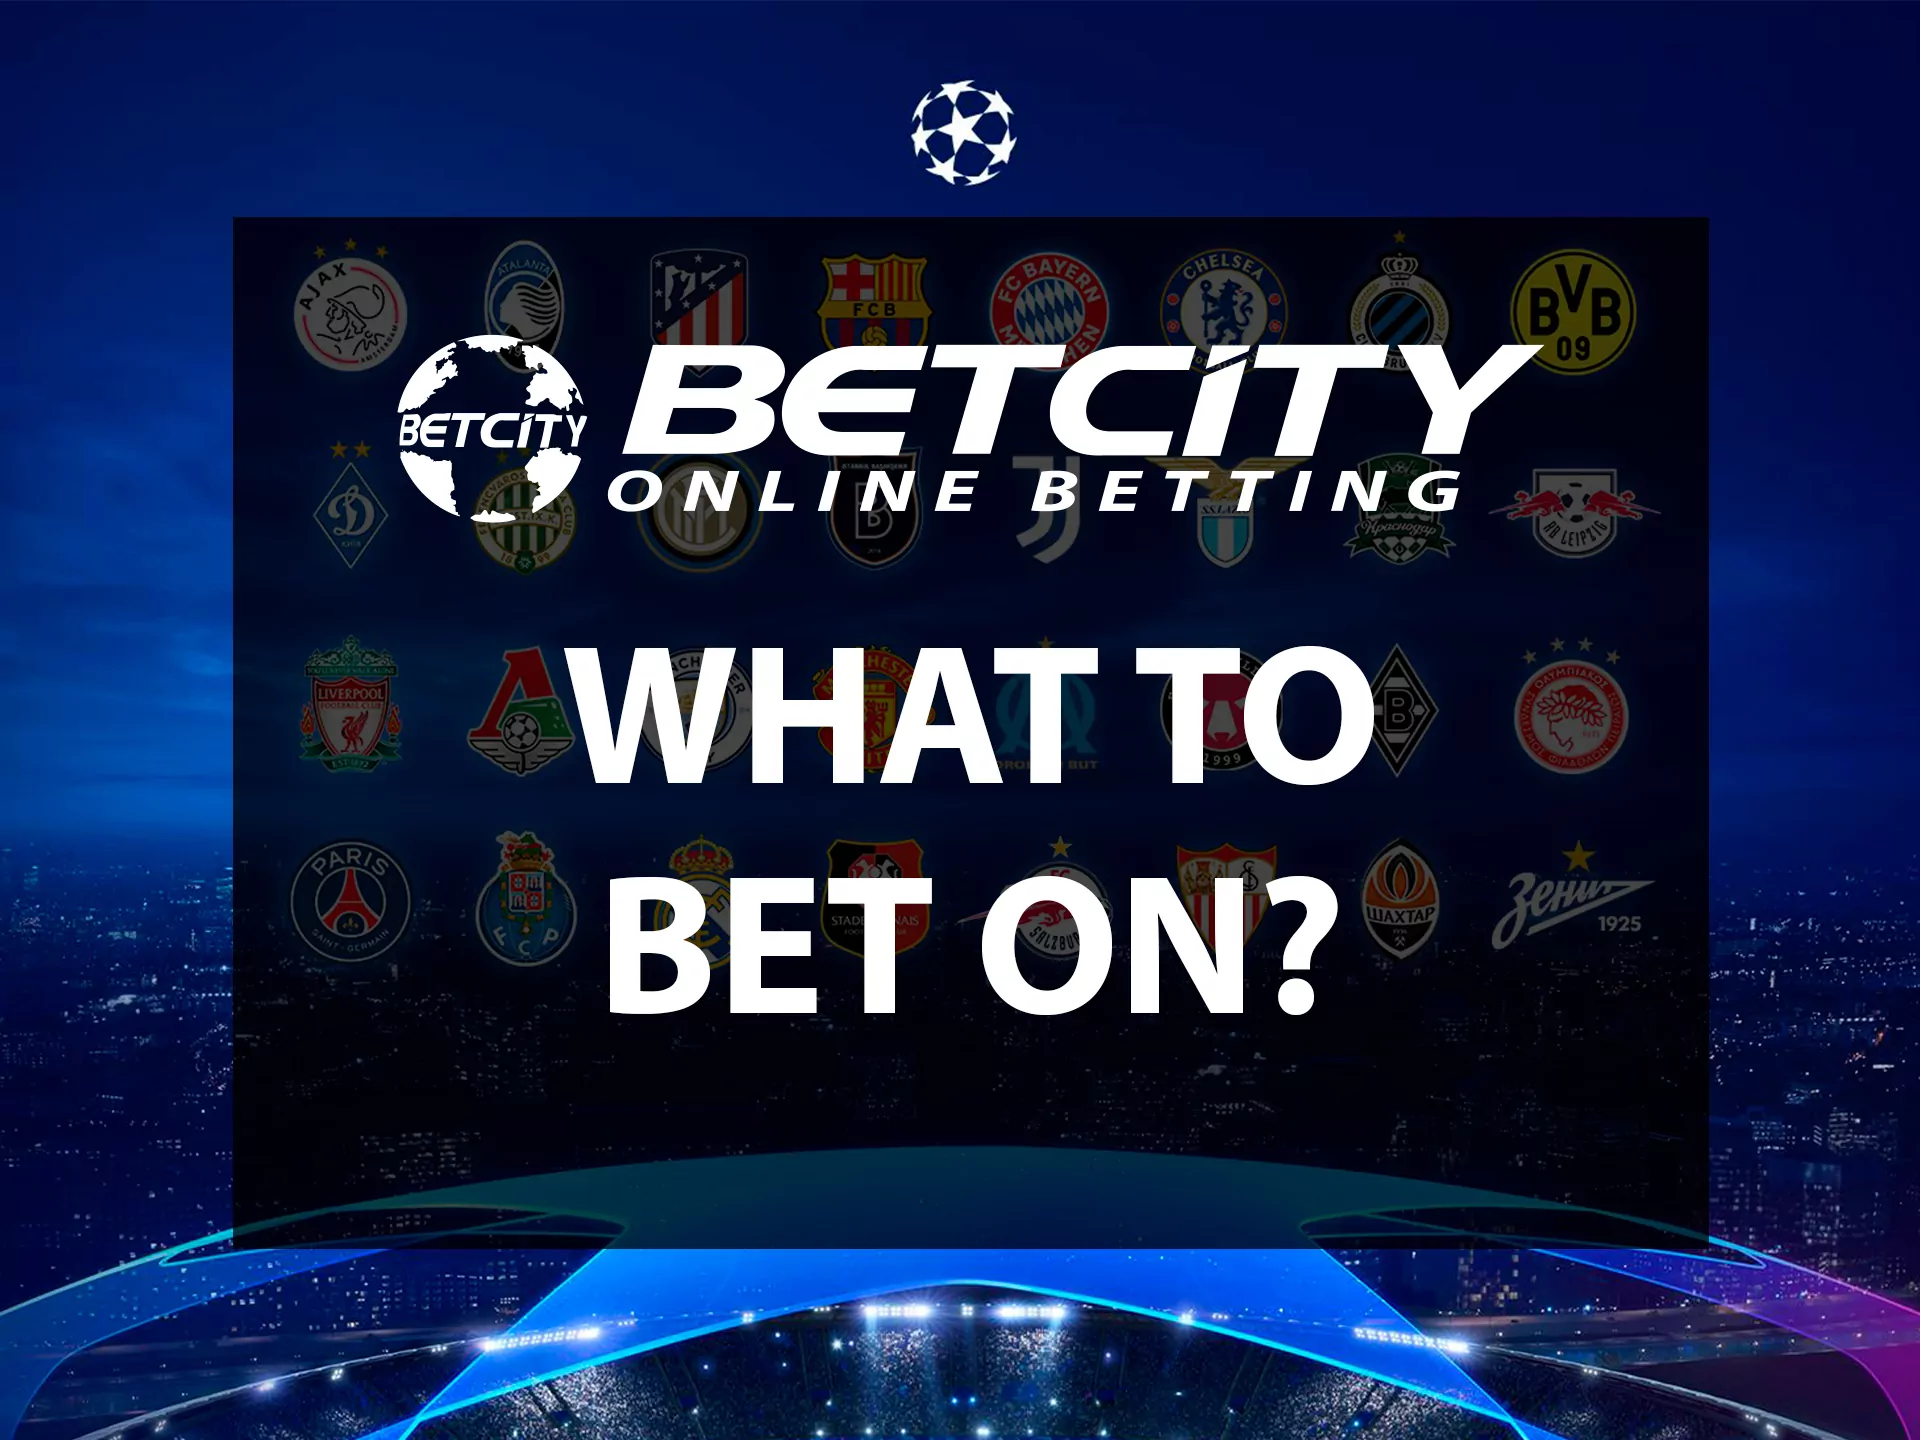 You can bet on every well-known football league at Betcity.